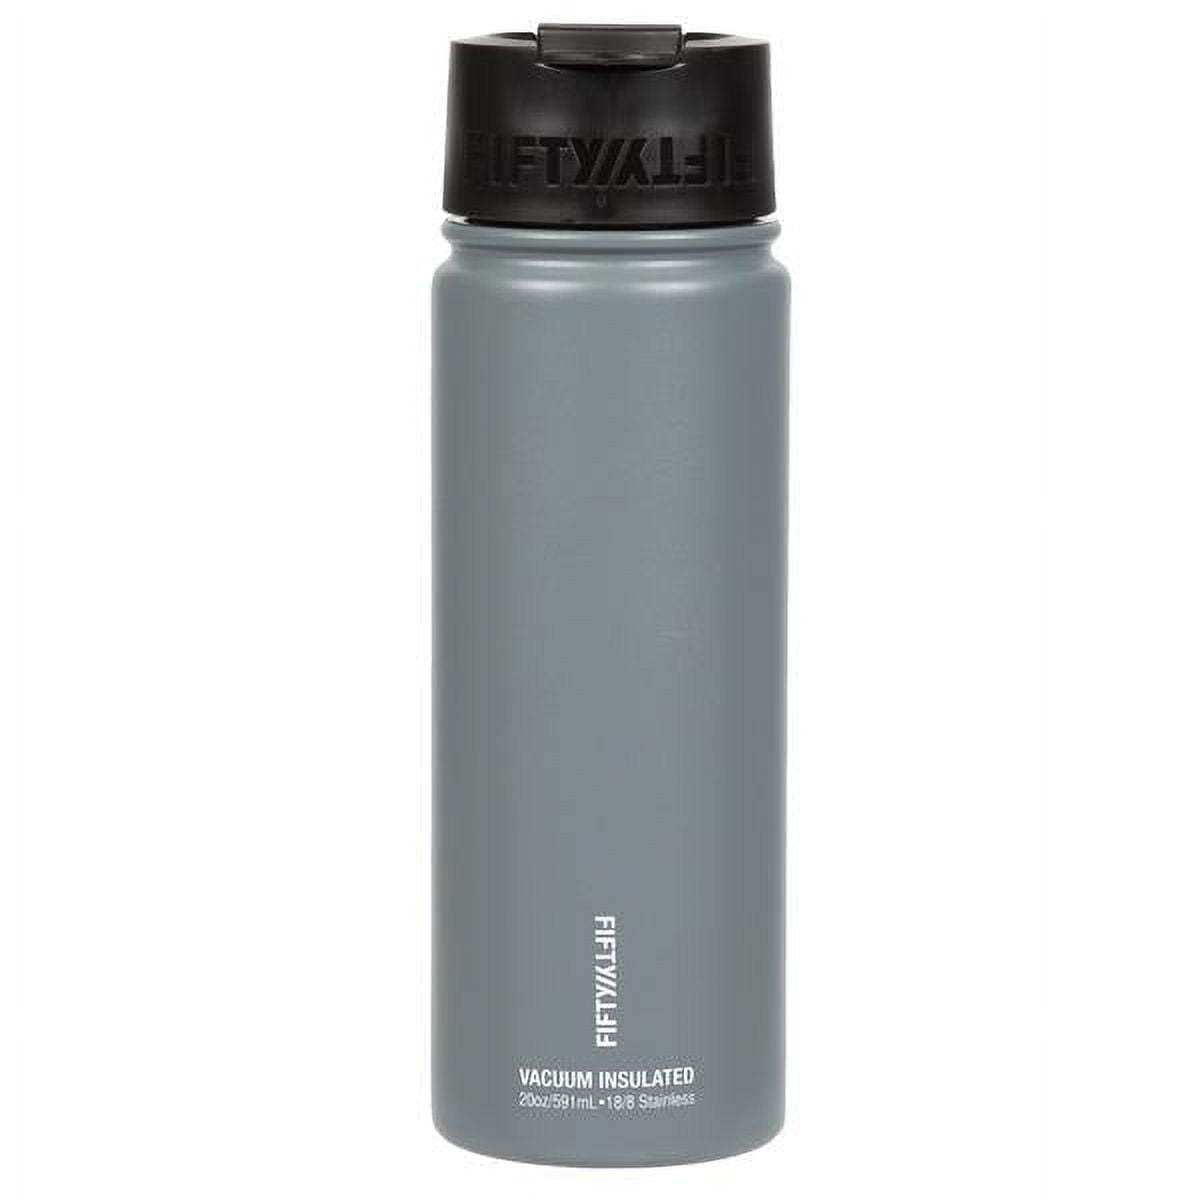 Hydrapeak Active Chug 50 oz. Cloud Triple Insulated Stainless Steel Water Bottle